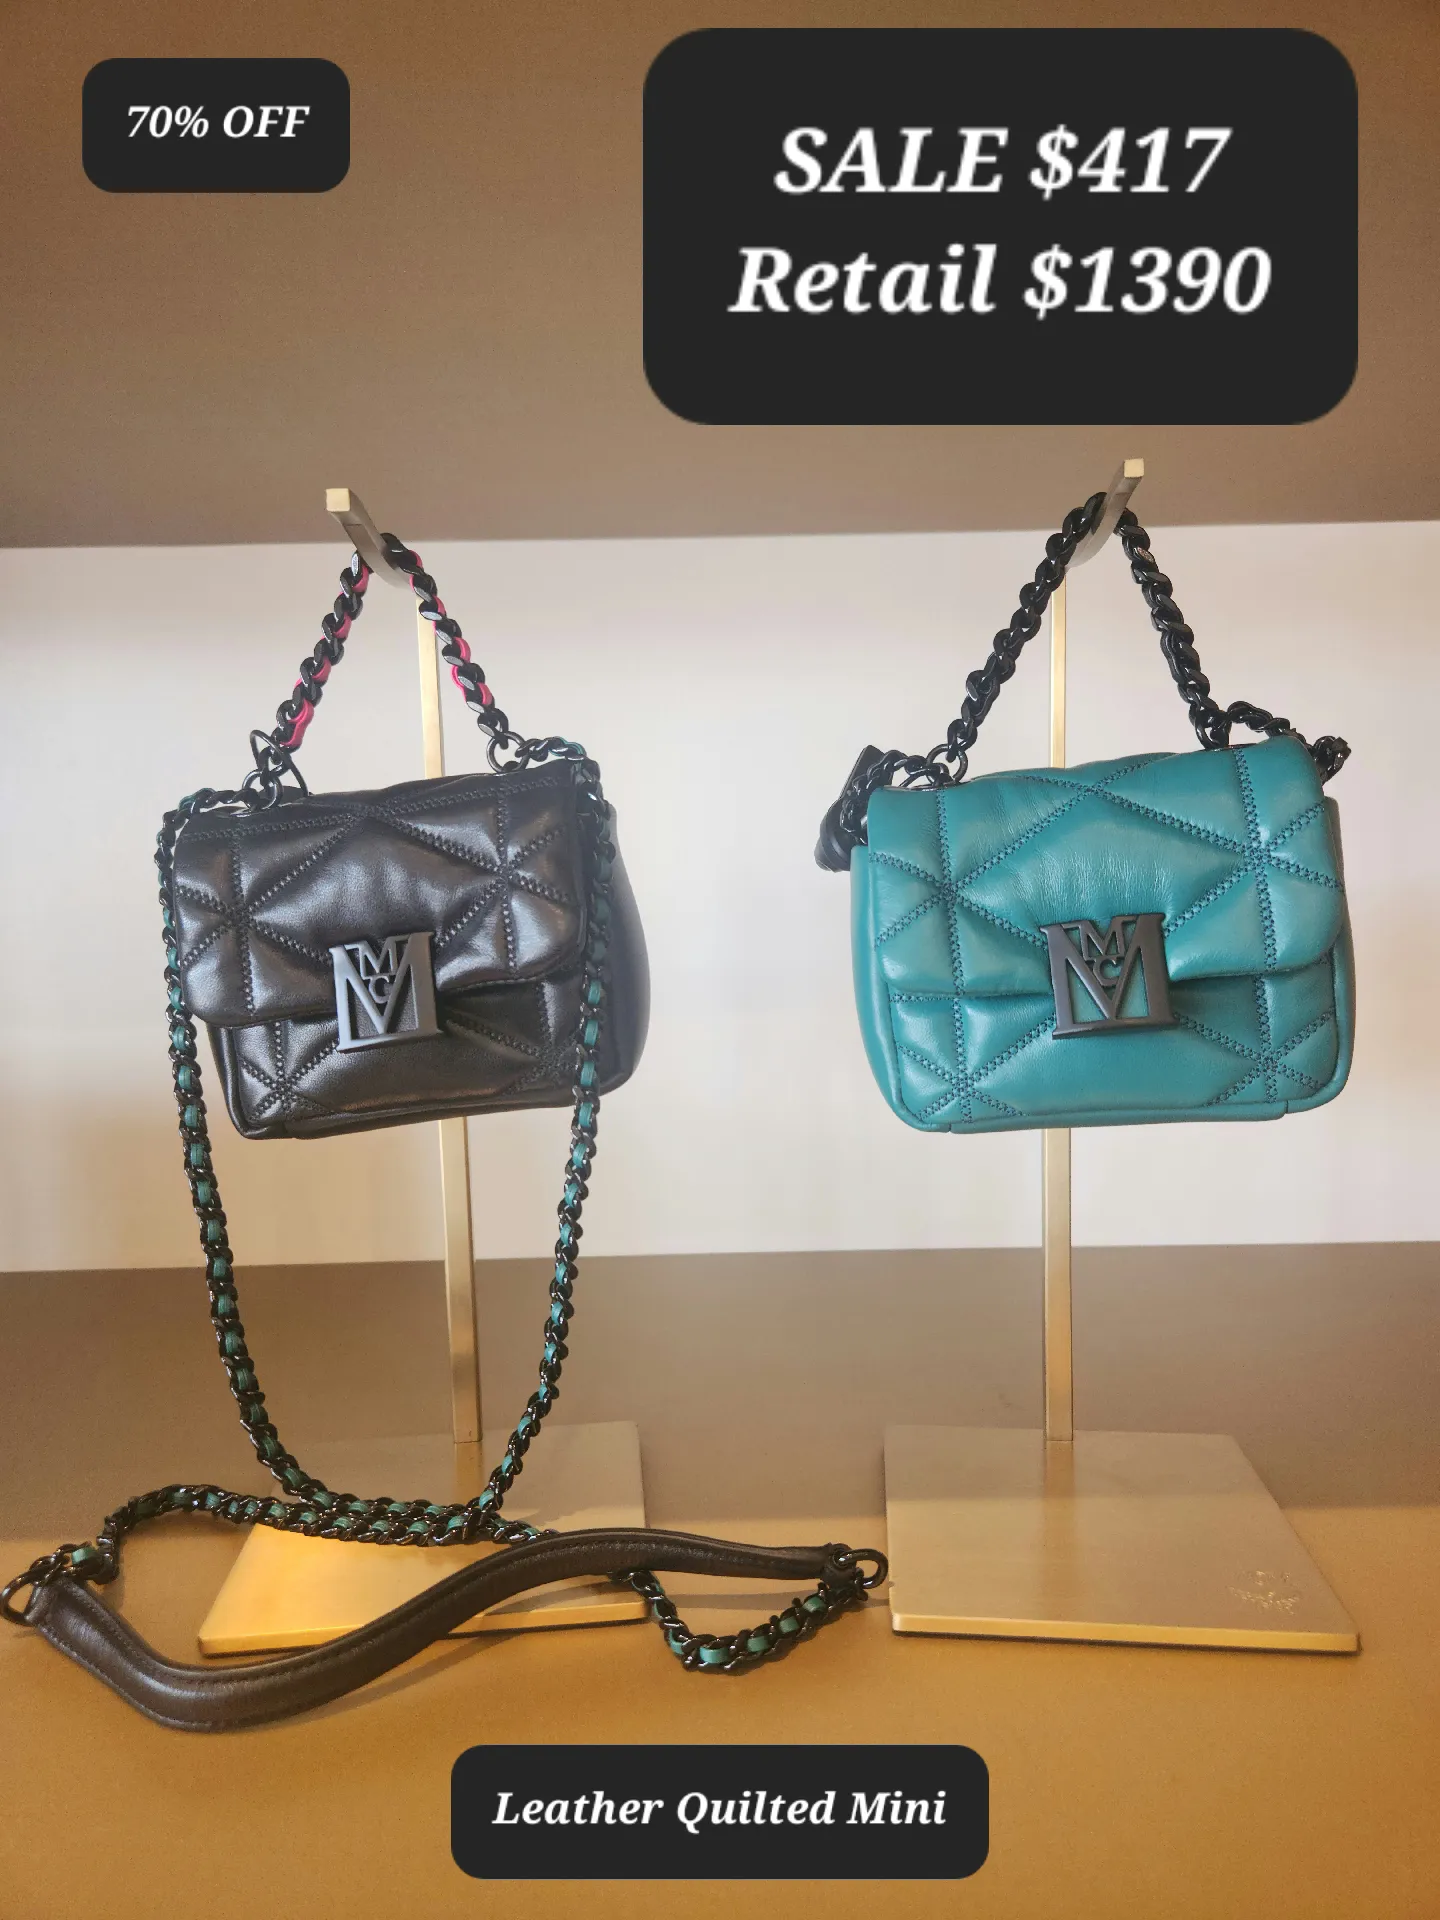 San Marcos Premium Outlets - We are obsessed with MCM mini bag